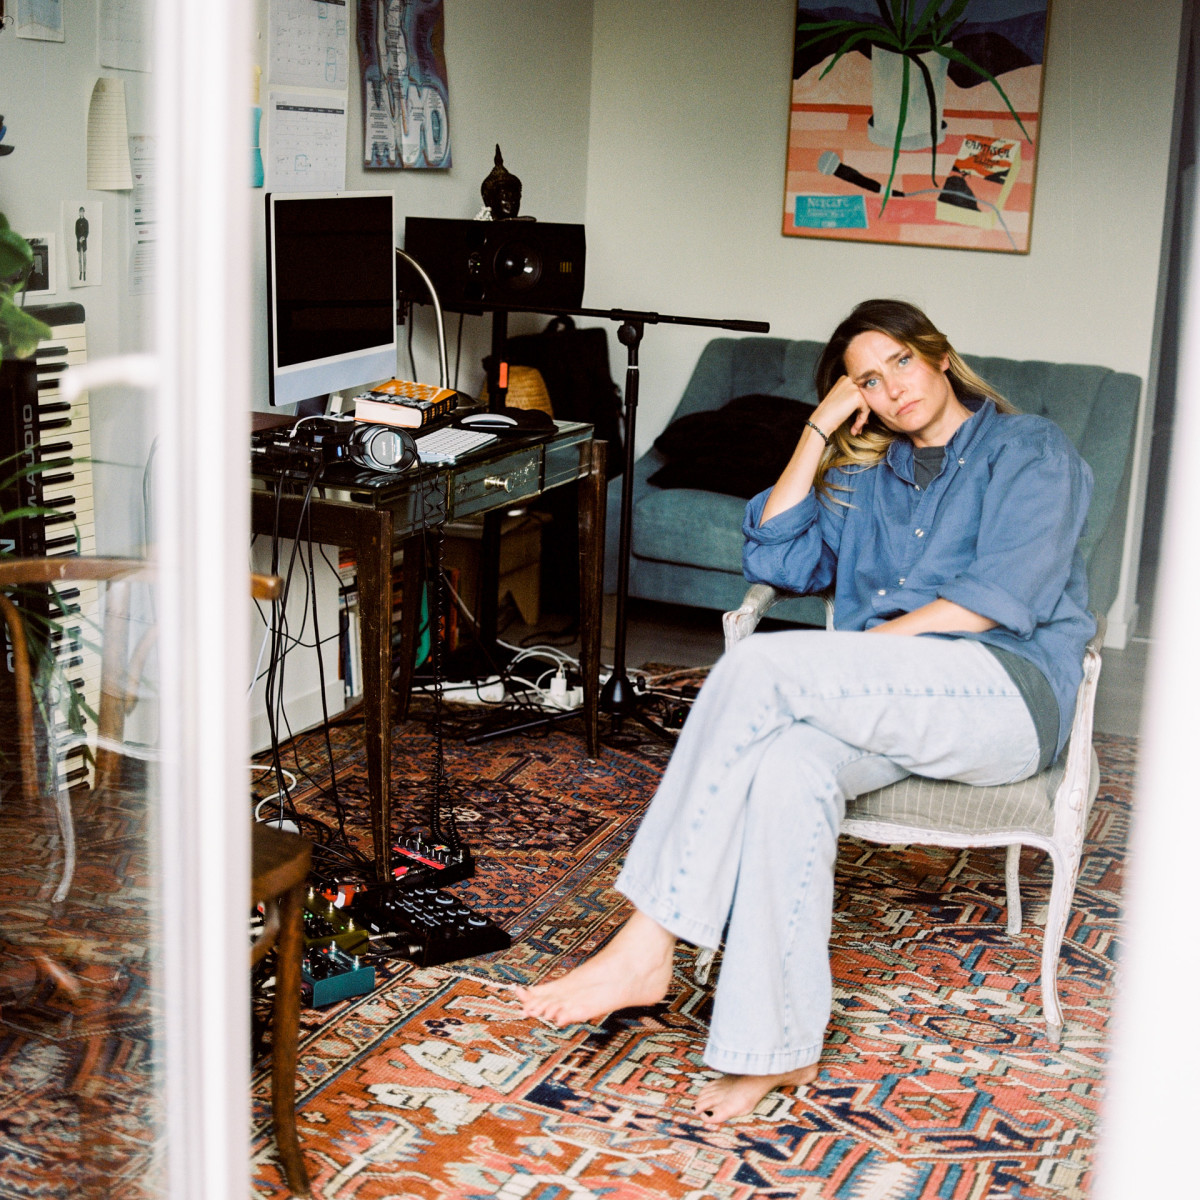 In conversation with musician Céline Gillain and her muddy mind